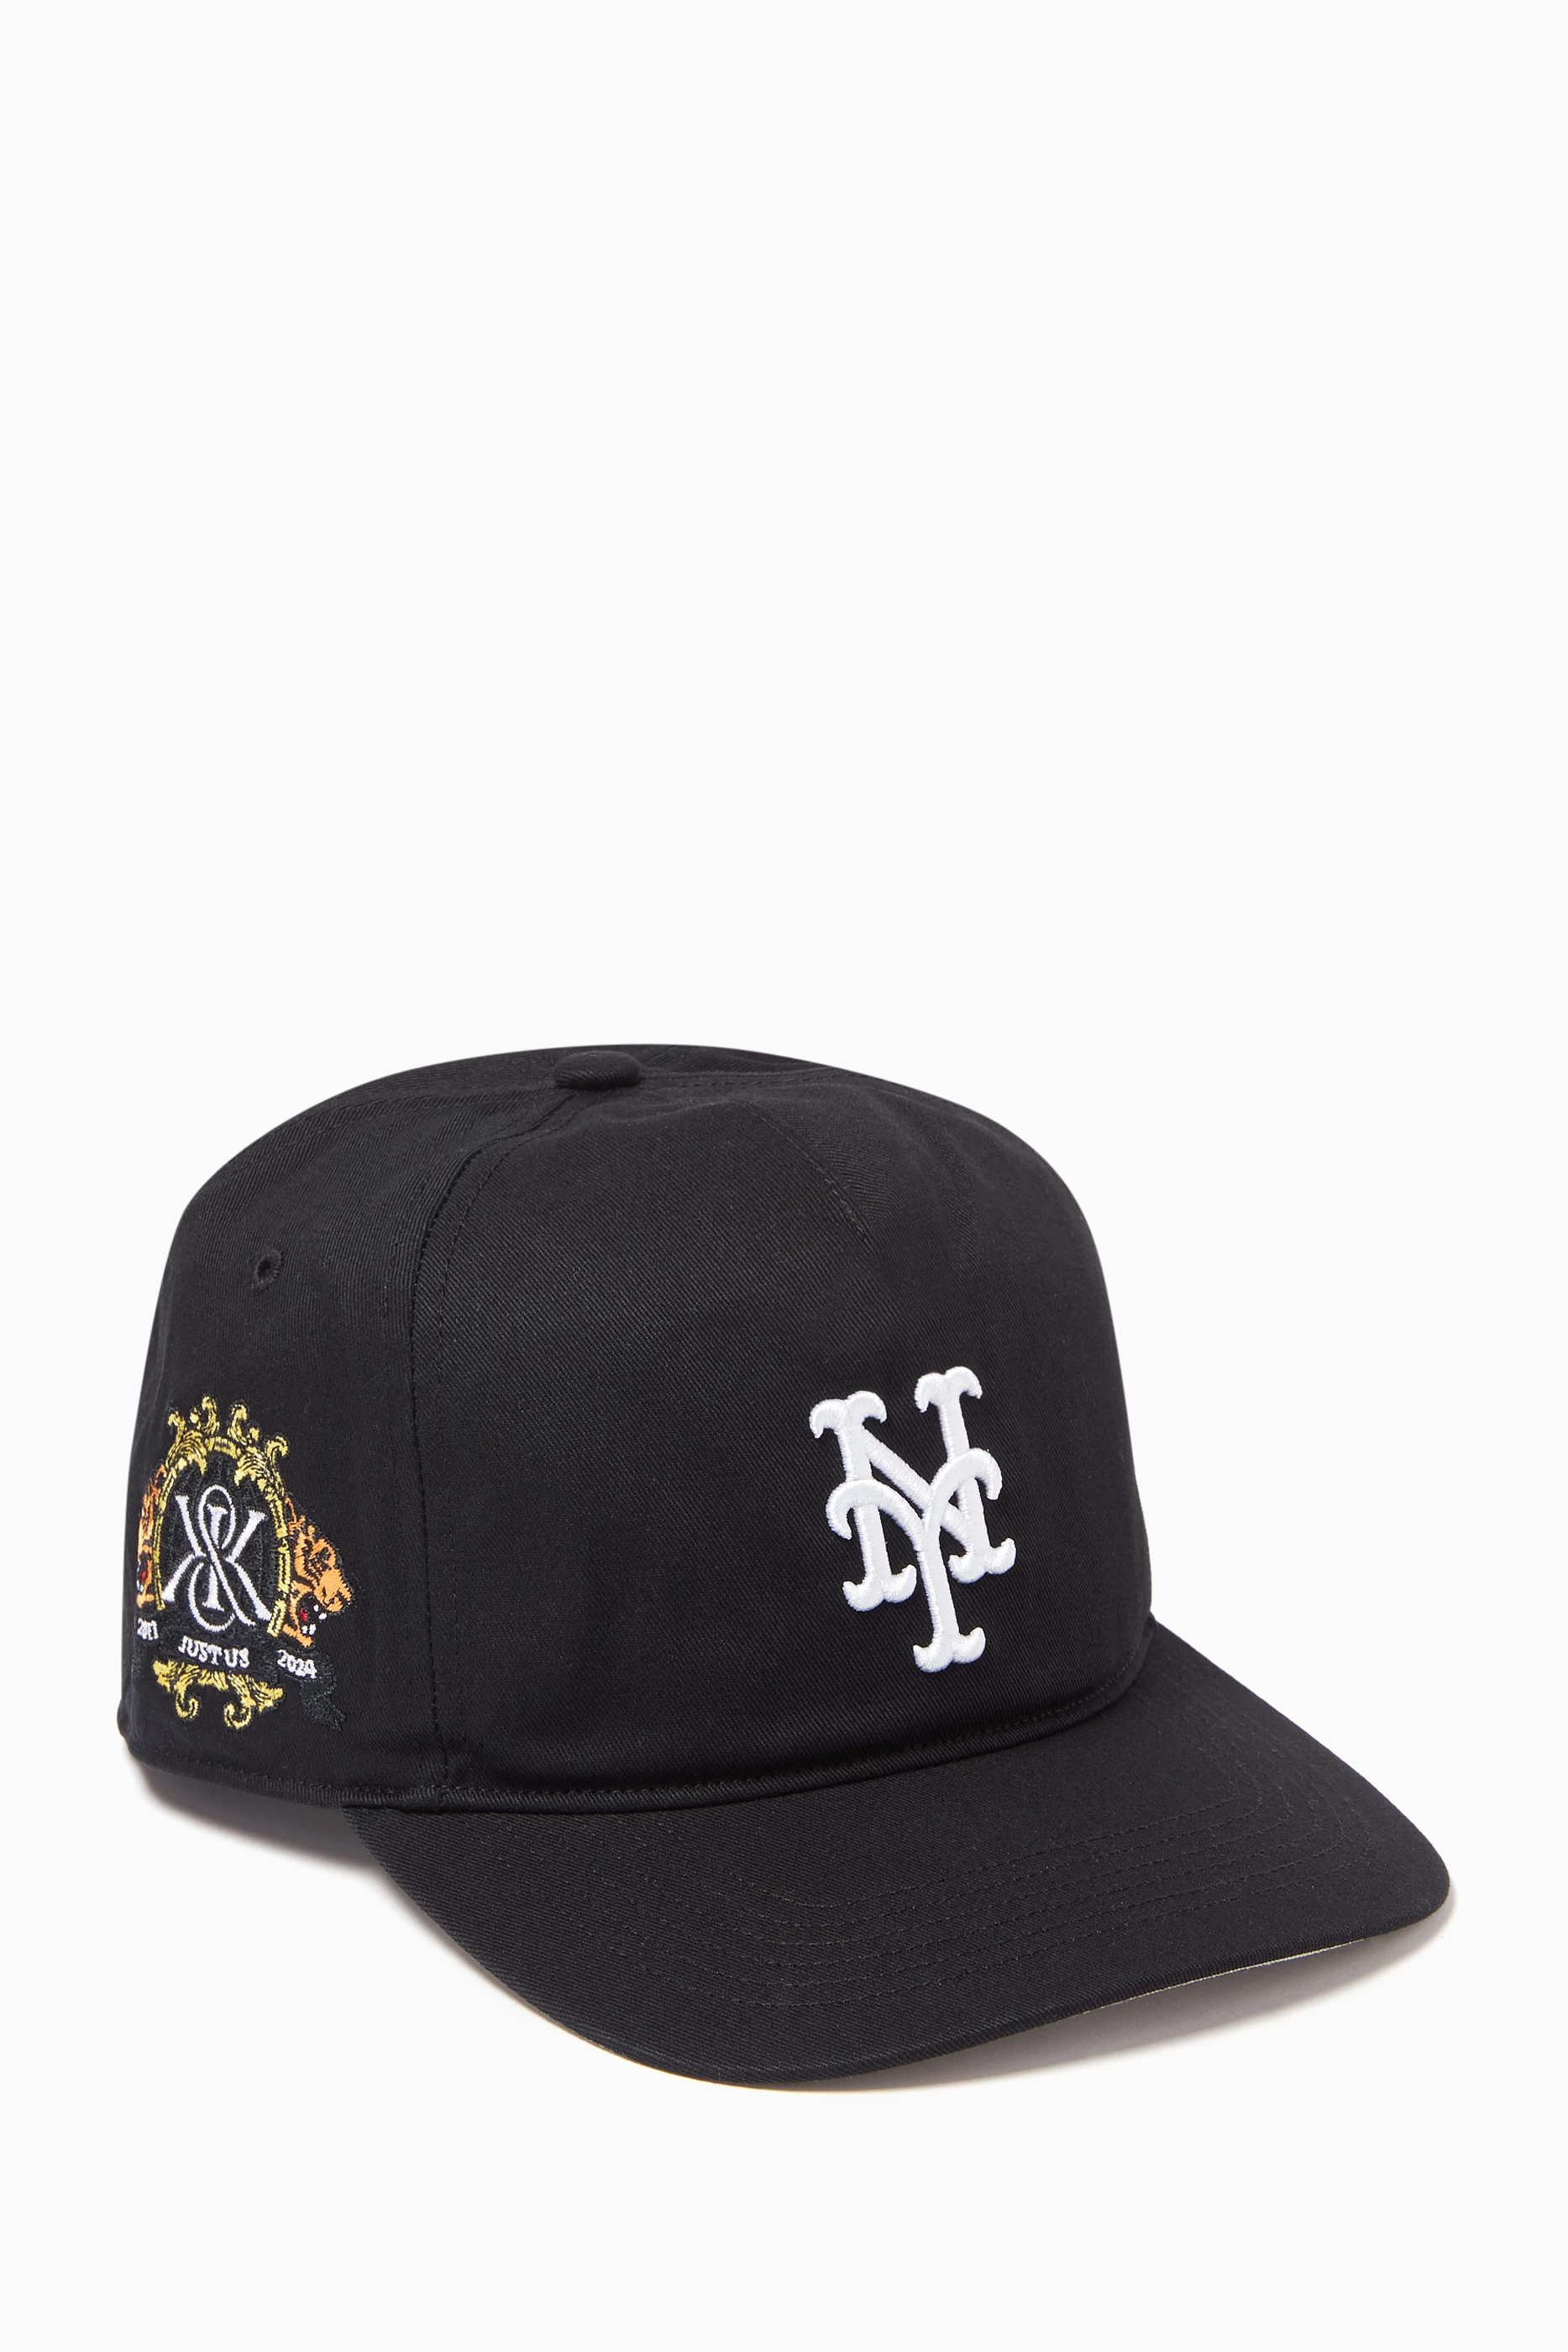 Buy Kith Black x 47 New York Mets Hitch Snapback Cap in Cotton 